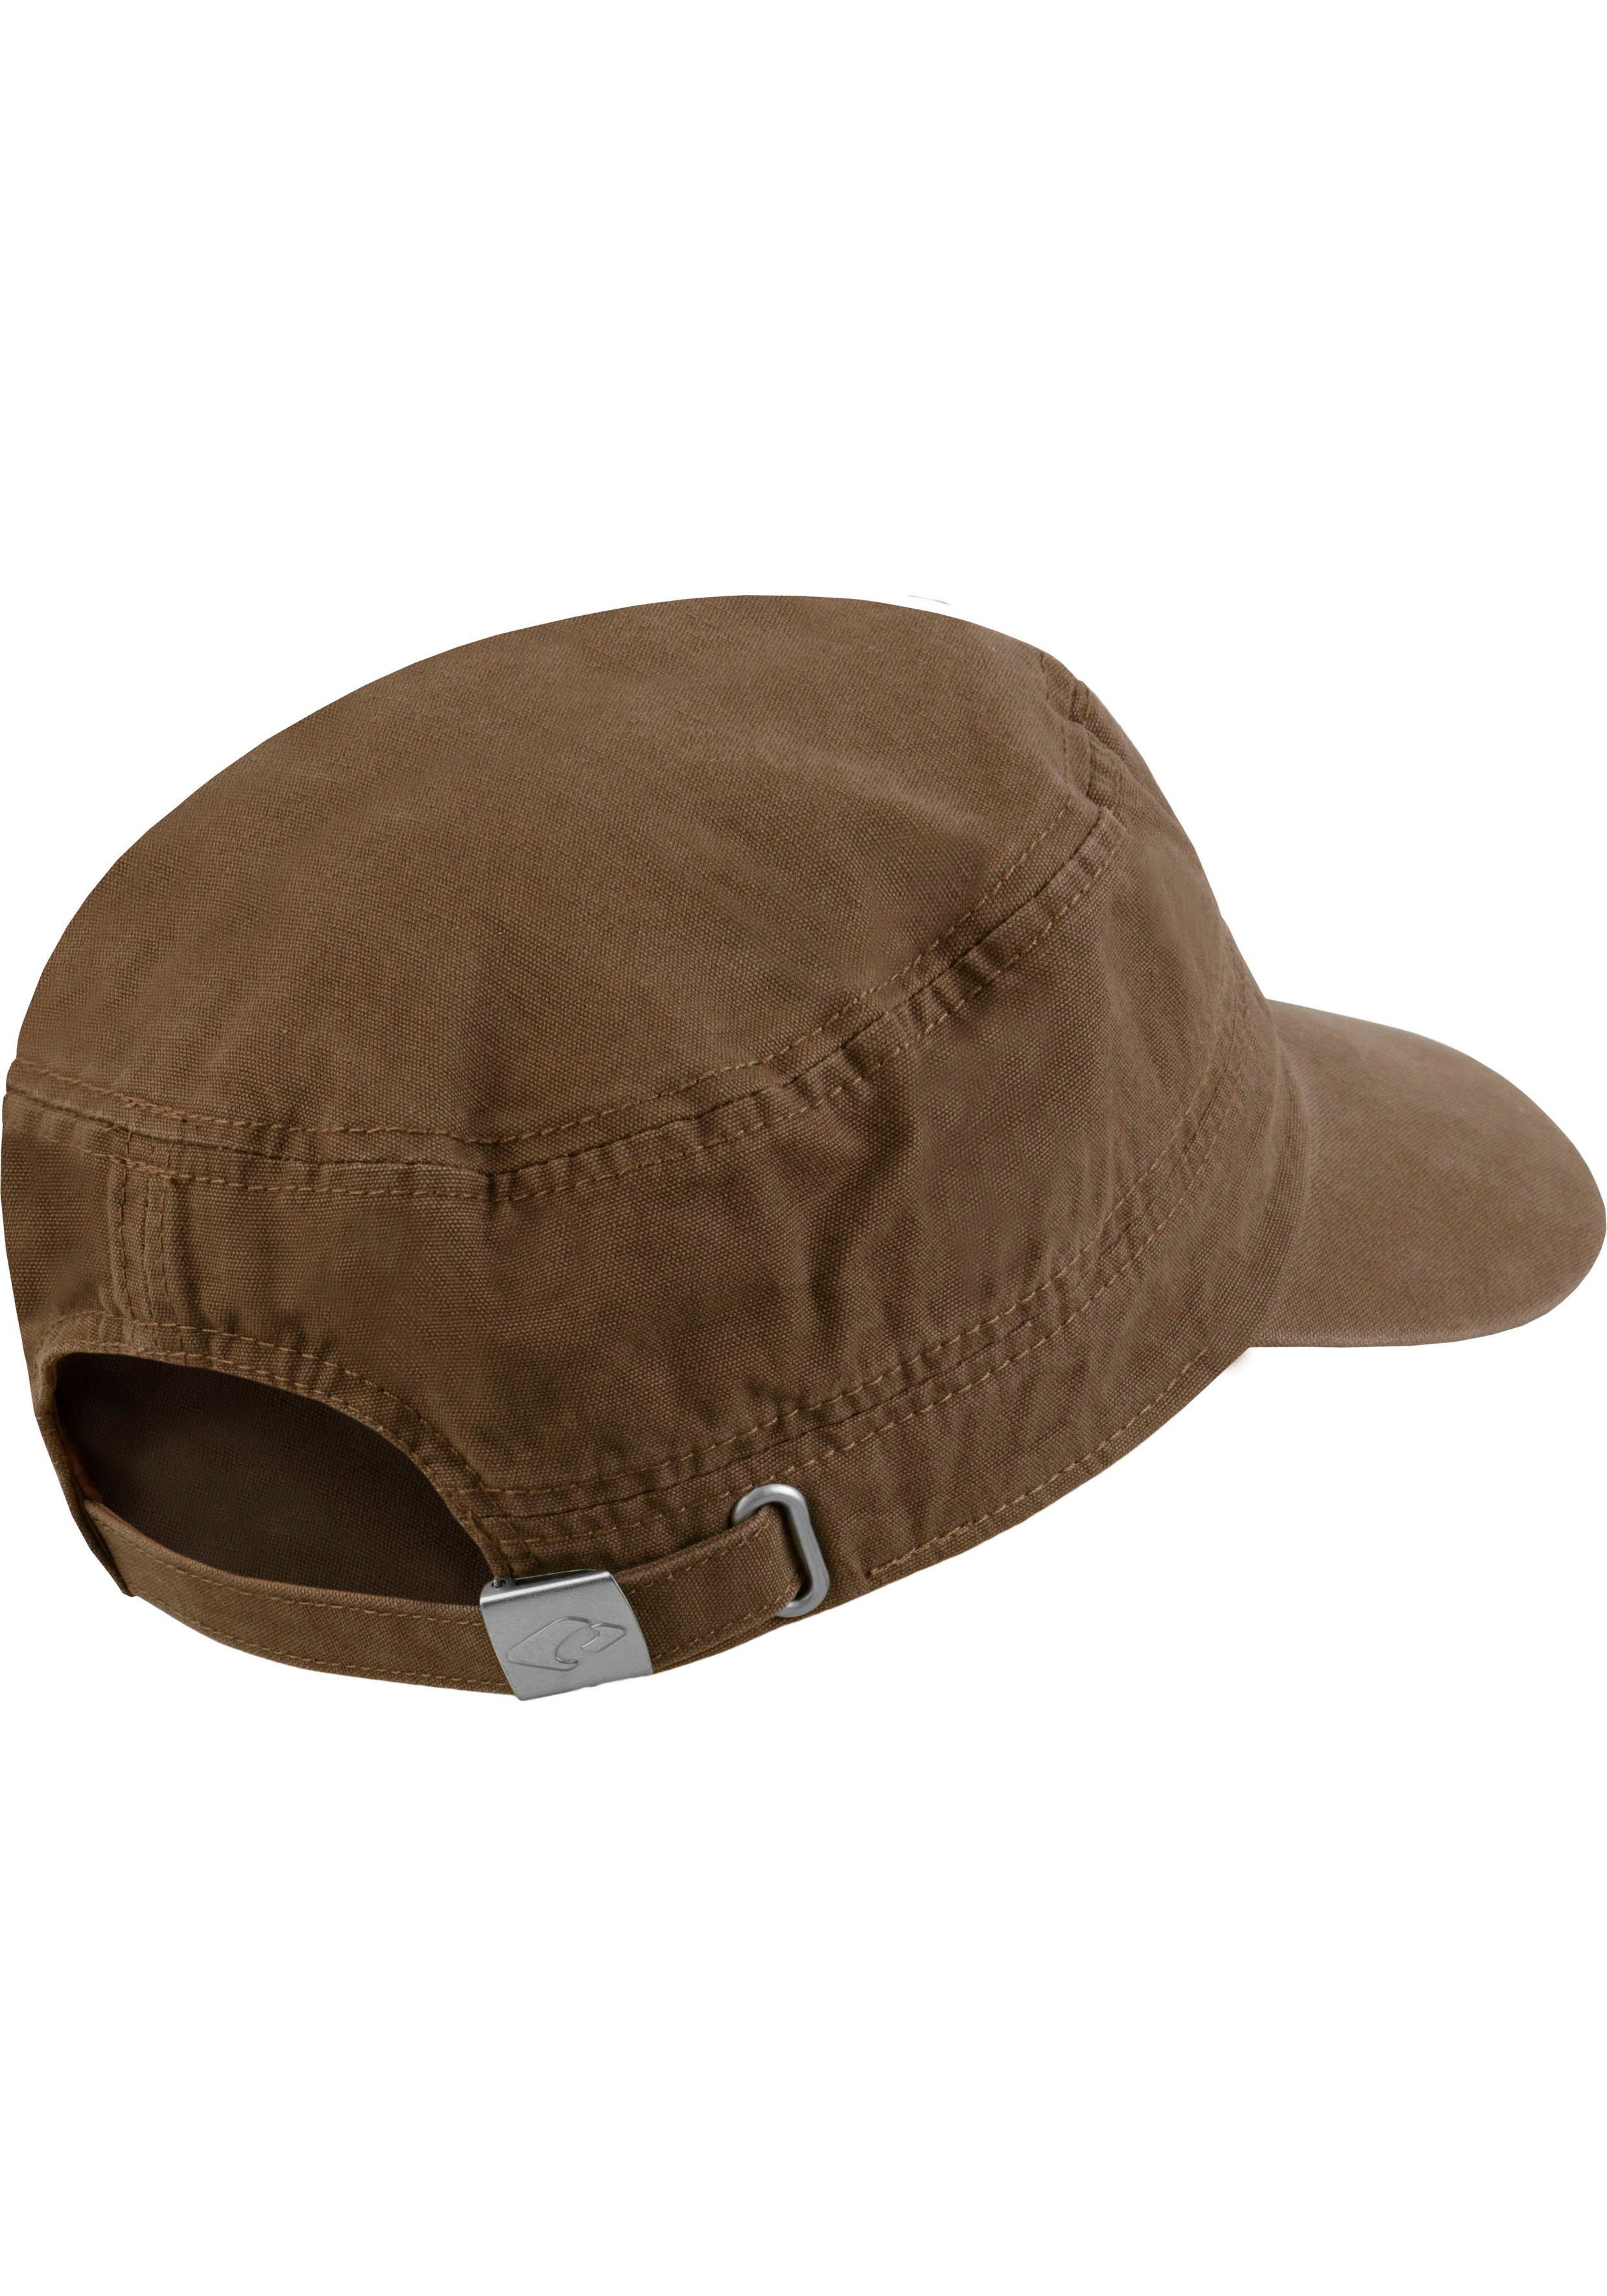 chillouts Army Cap Dublin Cap braun Mililtary-Style Hat im